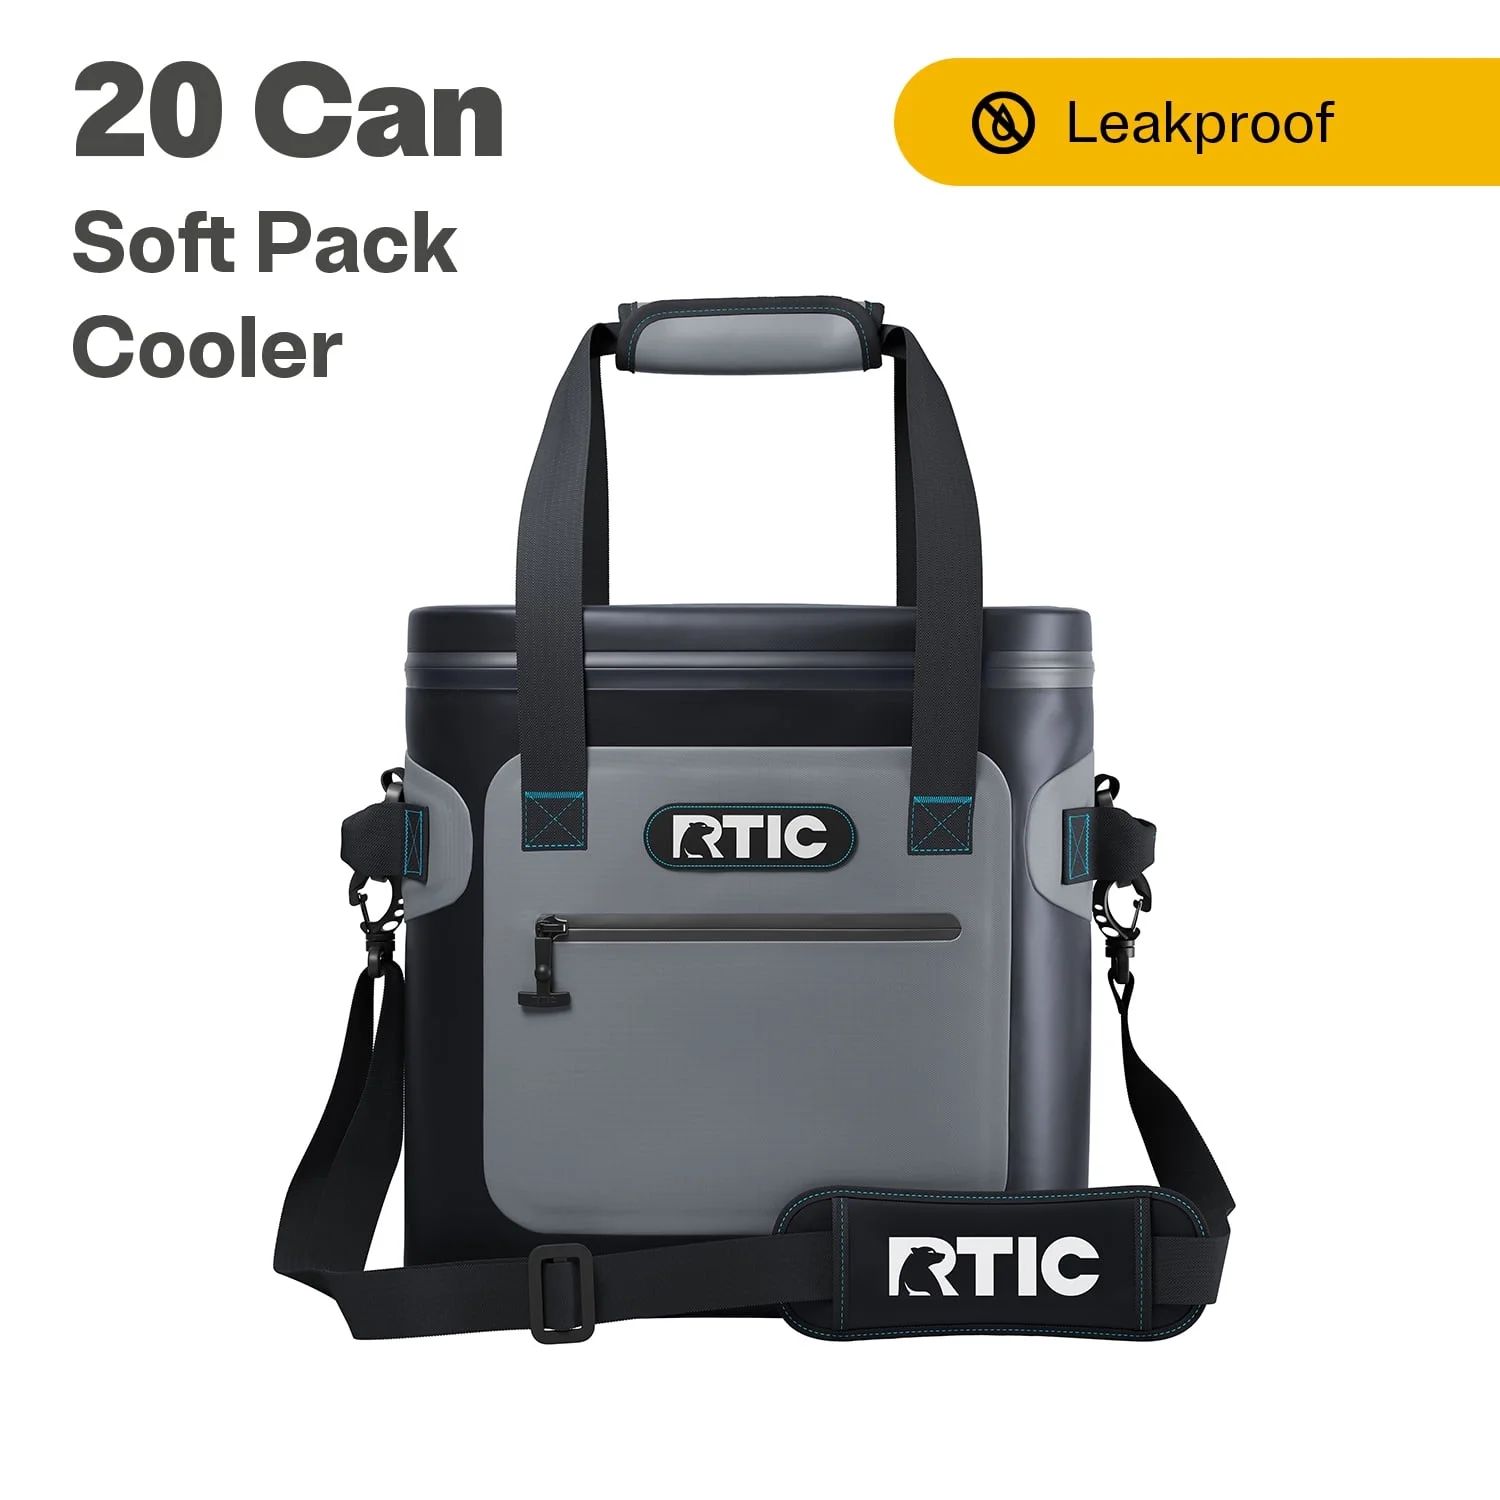 RTIC 20 Can Soft Pack Cooler, Leakproof Ice Chest Cooler with Waterproof Zipper, Blue/Grey - Walm... | Walmart (US)